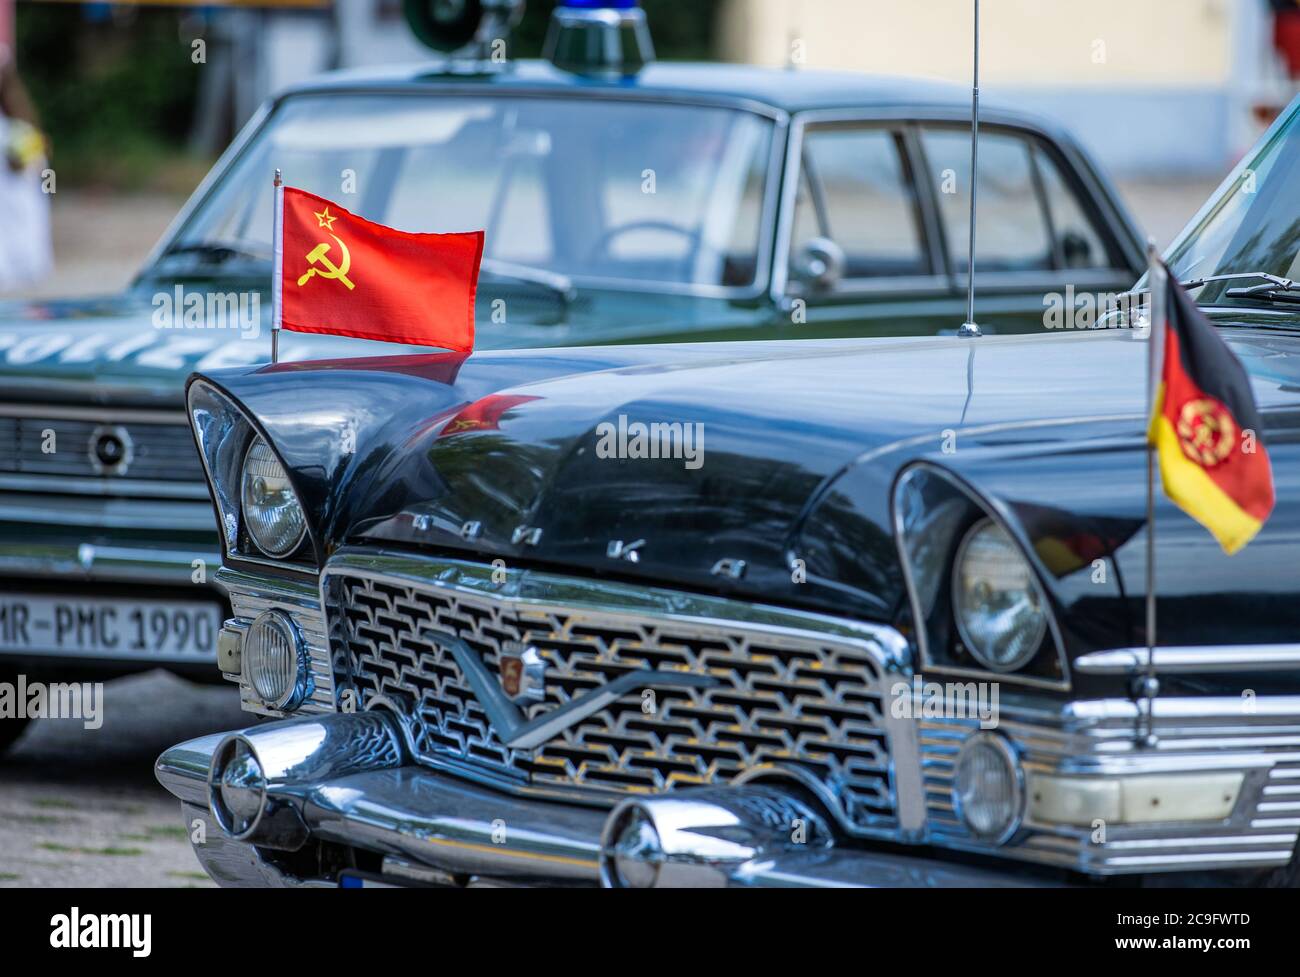 Beuster, Germany. 24th July, 2020. The flags of the Soviet Union and the GDR are waving on a Soviet Chaika limousine which is on the blue light days in the blue light museum Beuster on the exhibition area. Despite corona protection measures, the blue light museum on the Elbe celebrates its museum week and shows the collection of historical fire brigade, police and military technology. Credit: Jens Büttner/dpa-Zentralbild/ZB/dpa/Alamy Live News Stock Photo